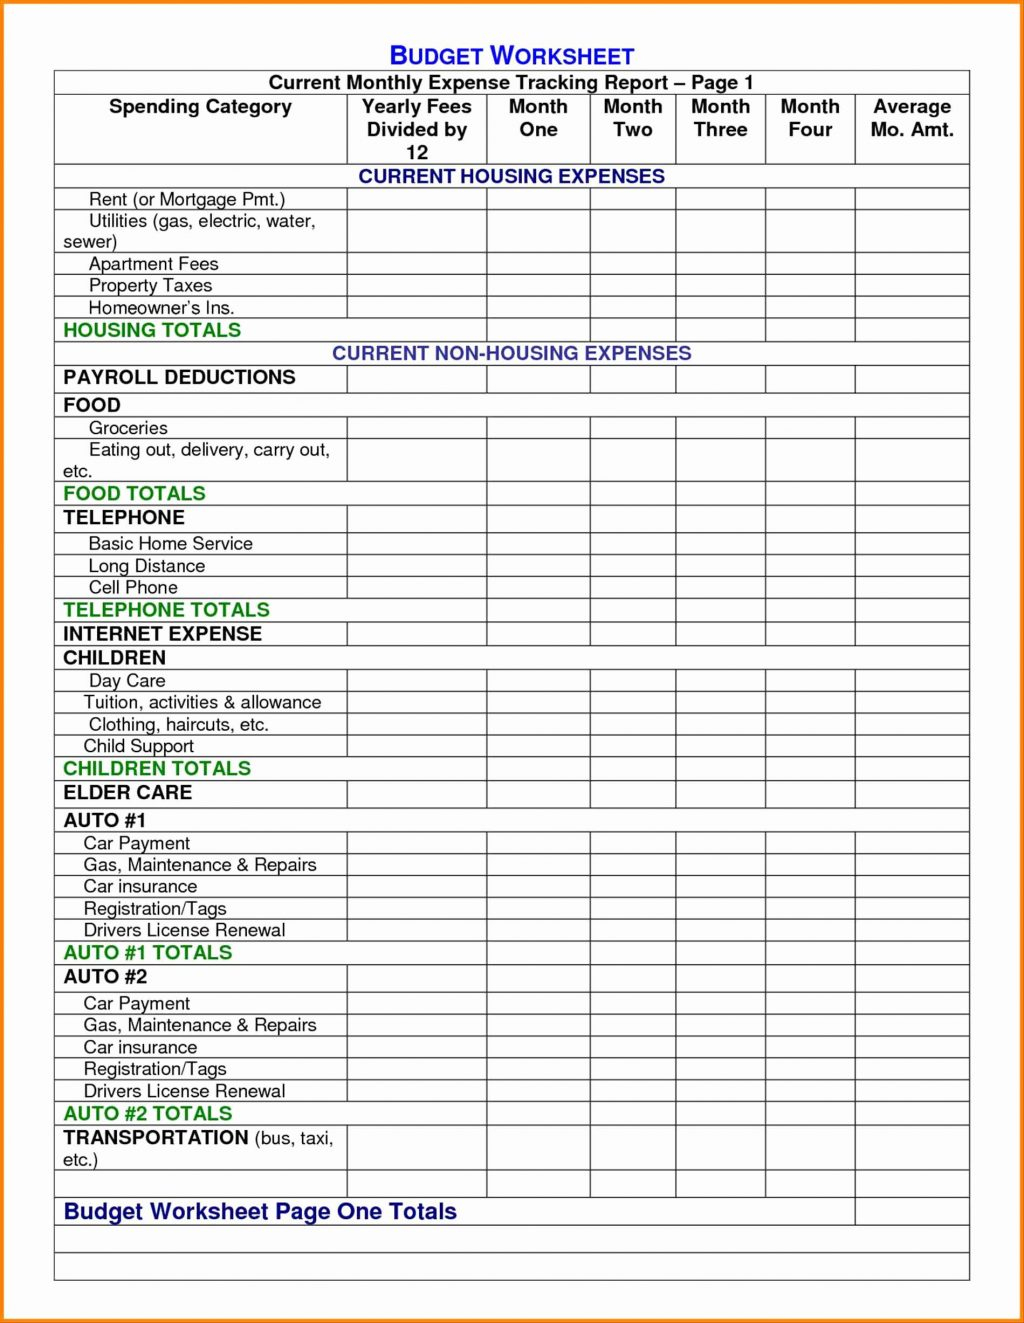 Farm Accounting Spreadsheet Free For Templates Small Business Of And Farm Accounting Spreadsheet Free